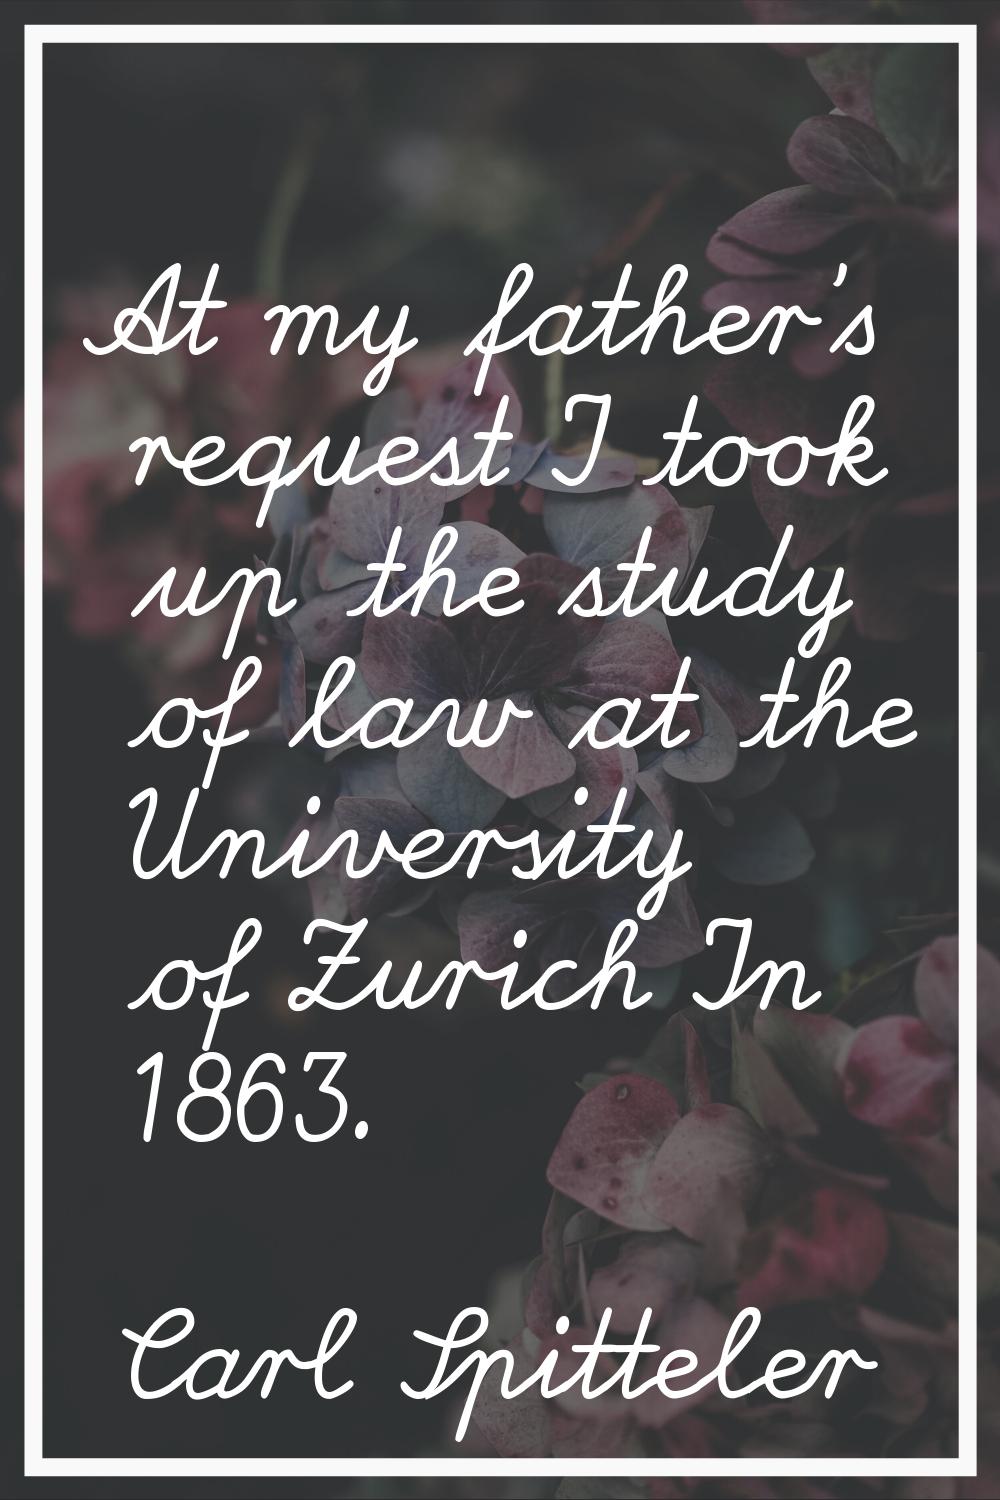 At my father's request I took up the study of law at the University of Zurich In 1863.